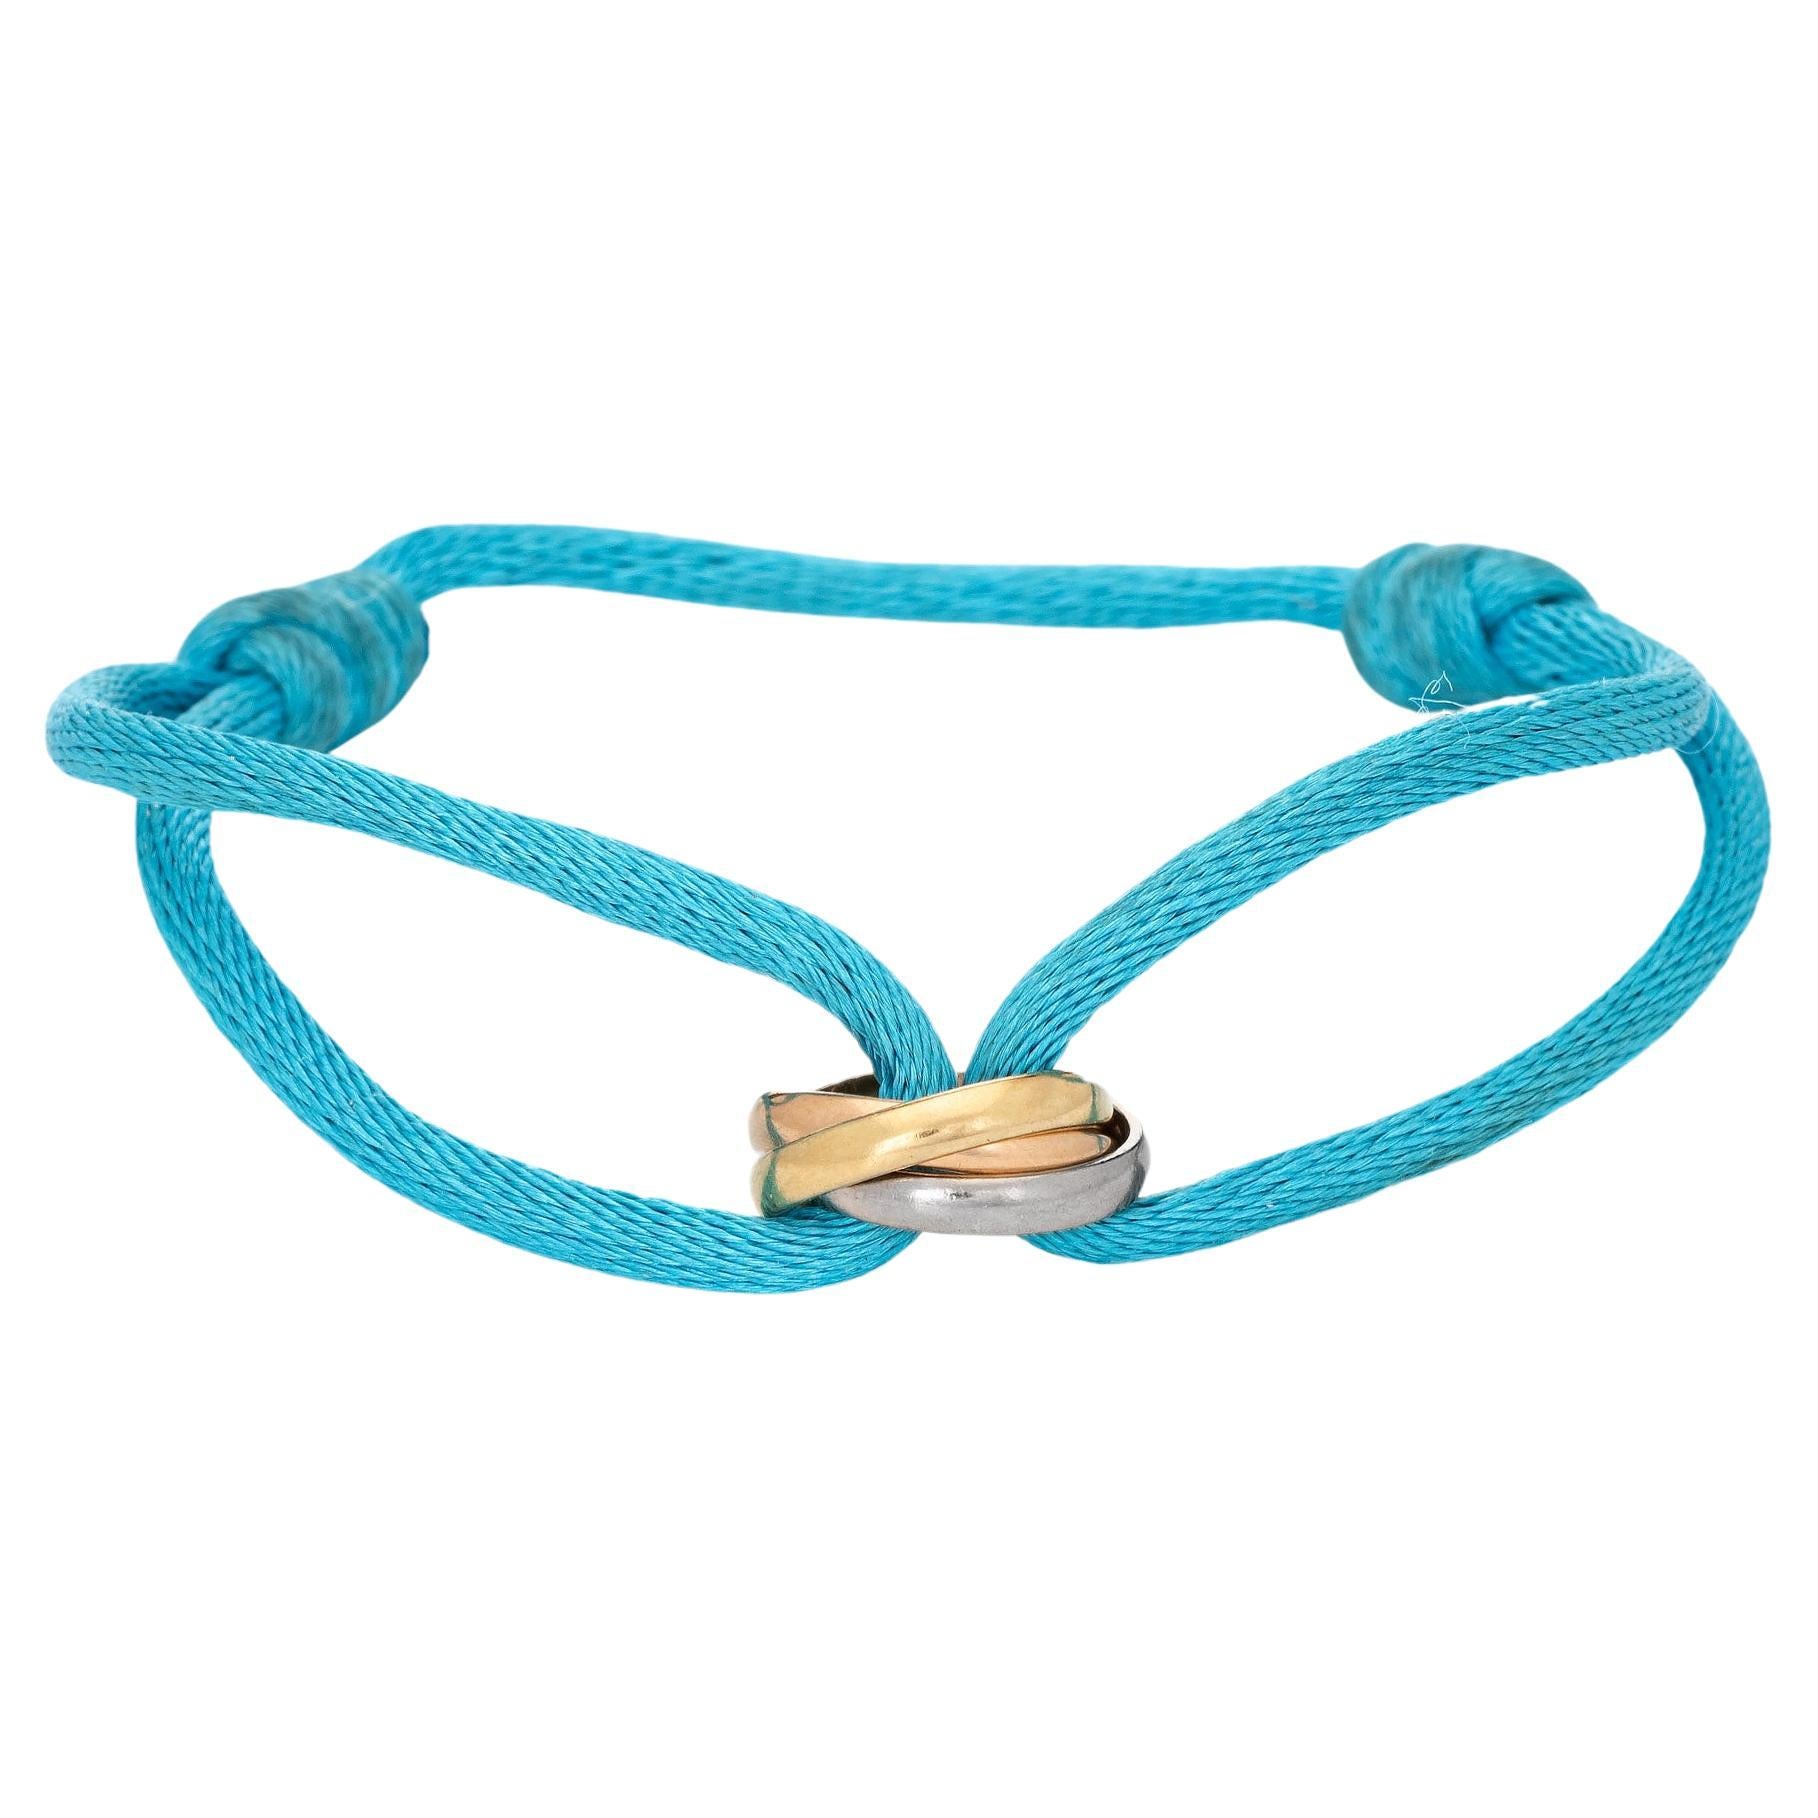 Cartier Love Charity Bracelet Turquoise Silk Cord Trinity 18k Gold Estate For Sale